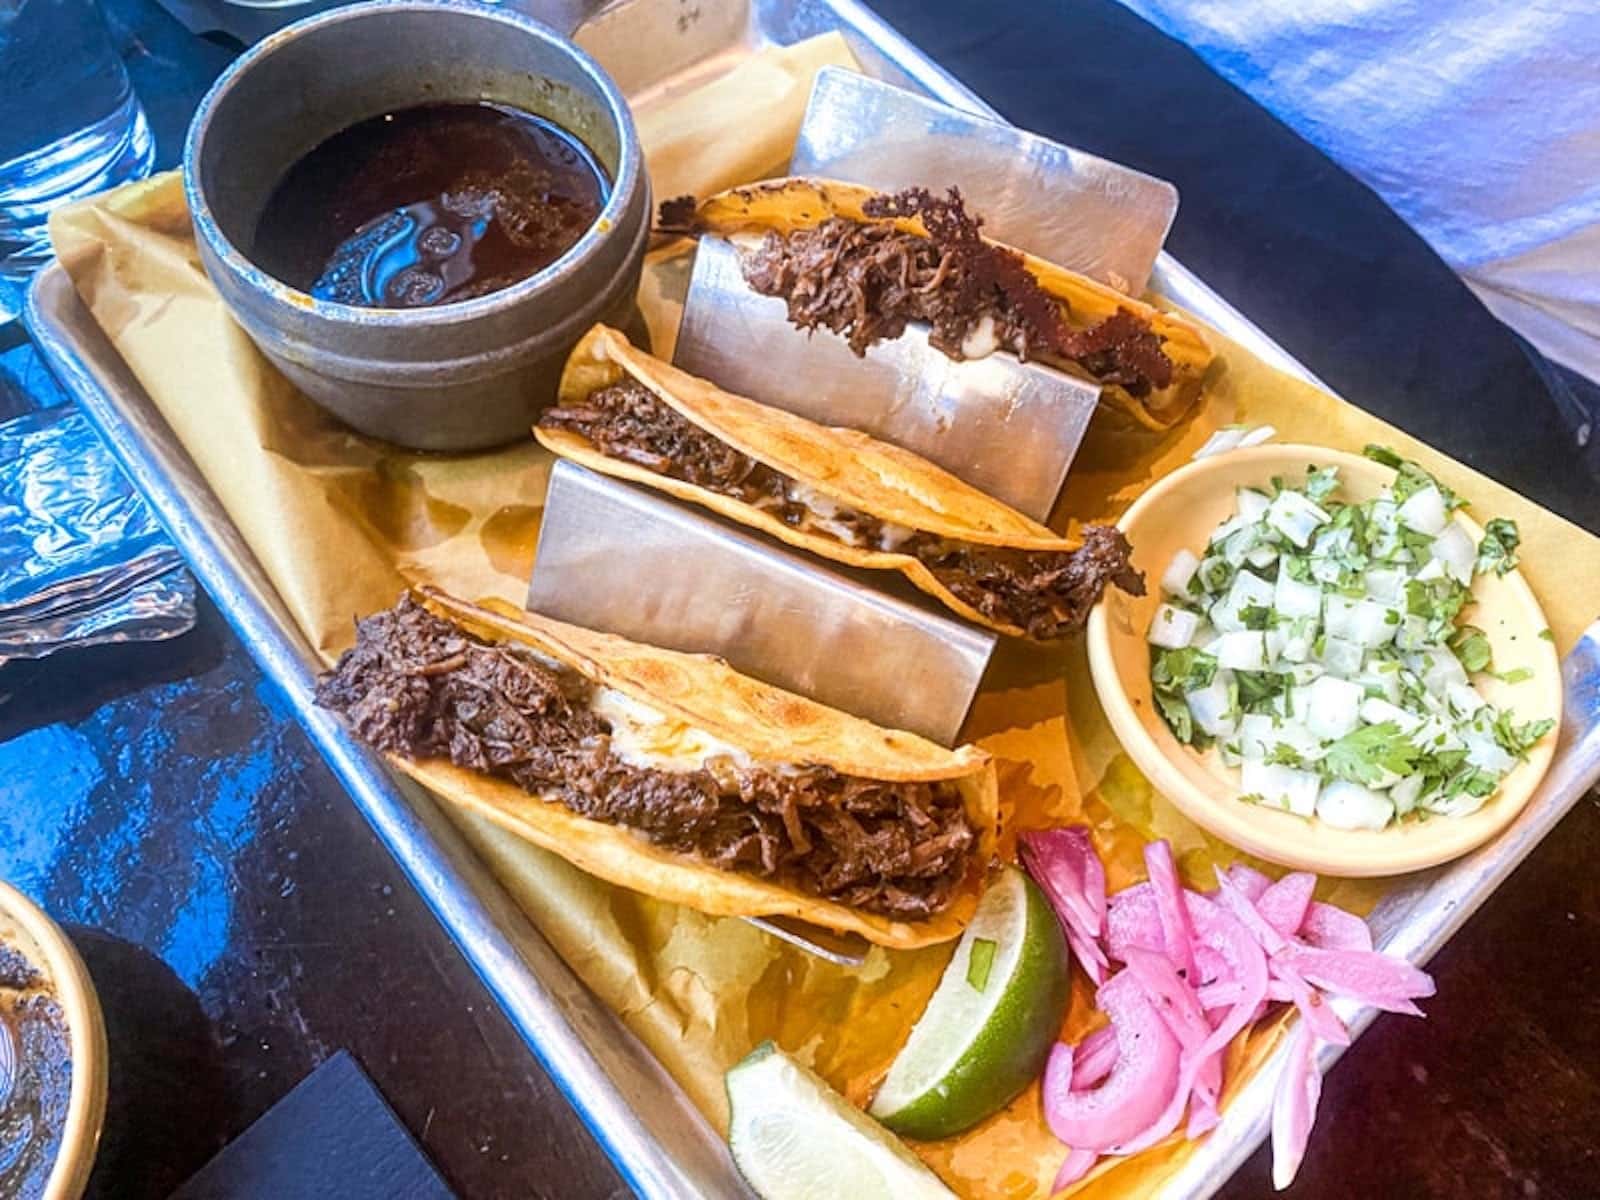 Where to Get Best Tacos in Salt Lake and Beyond